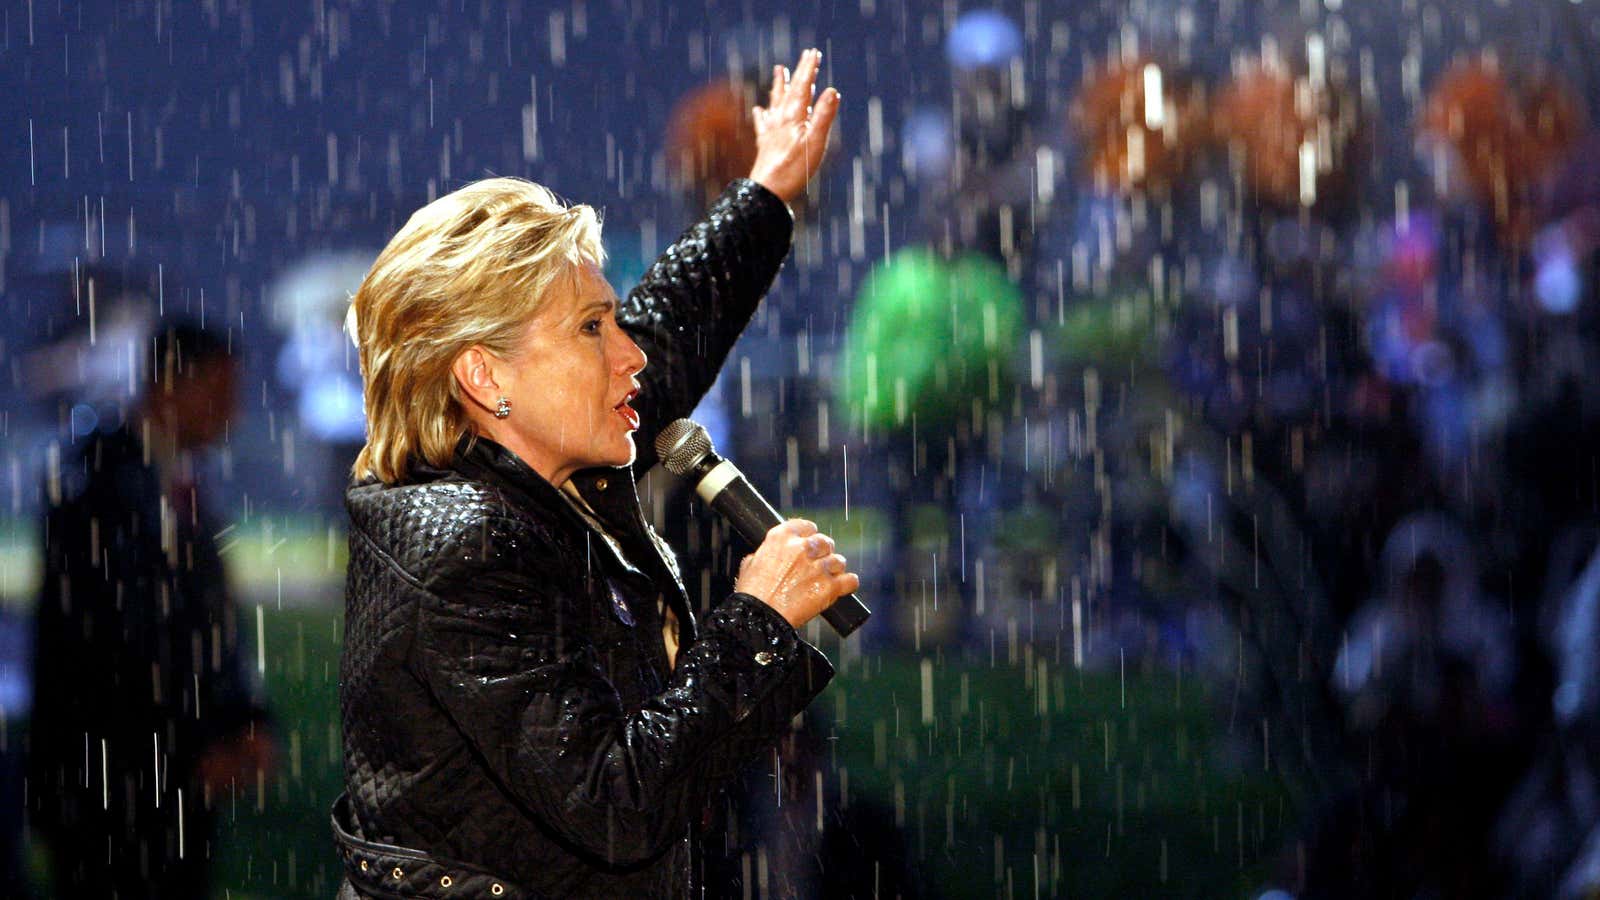 Since 2008, the climate has changed for Hillary Clinton.